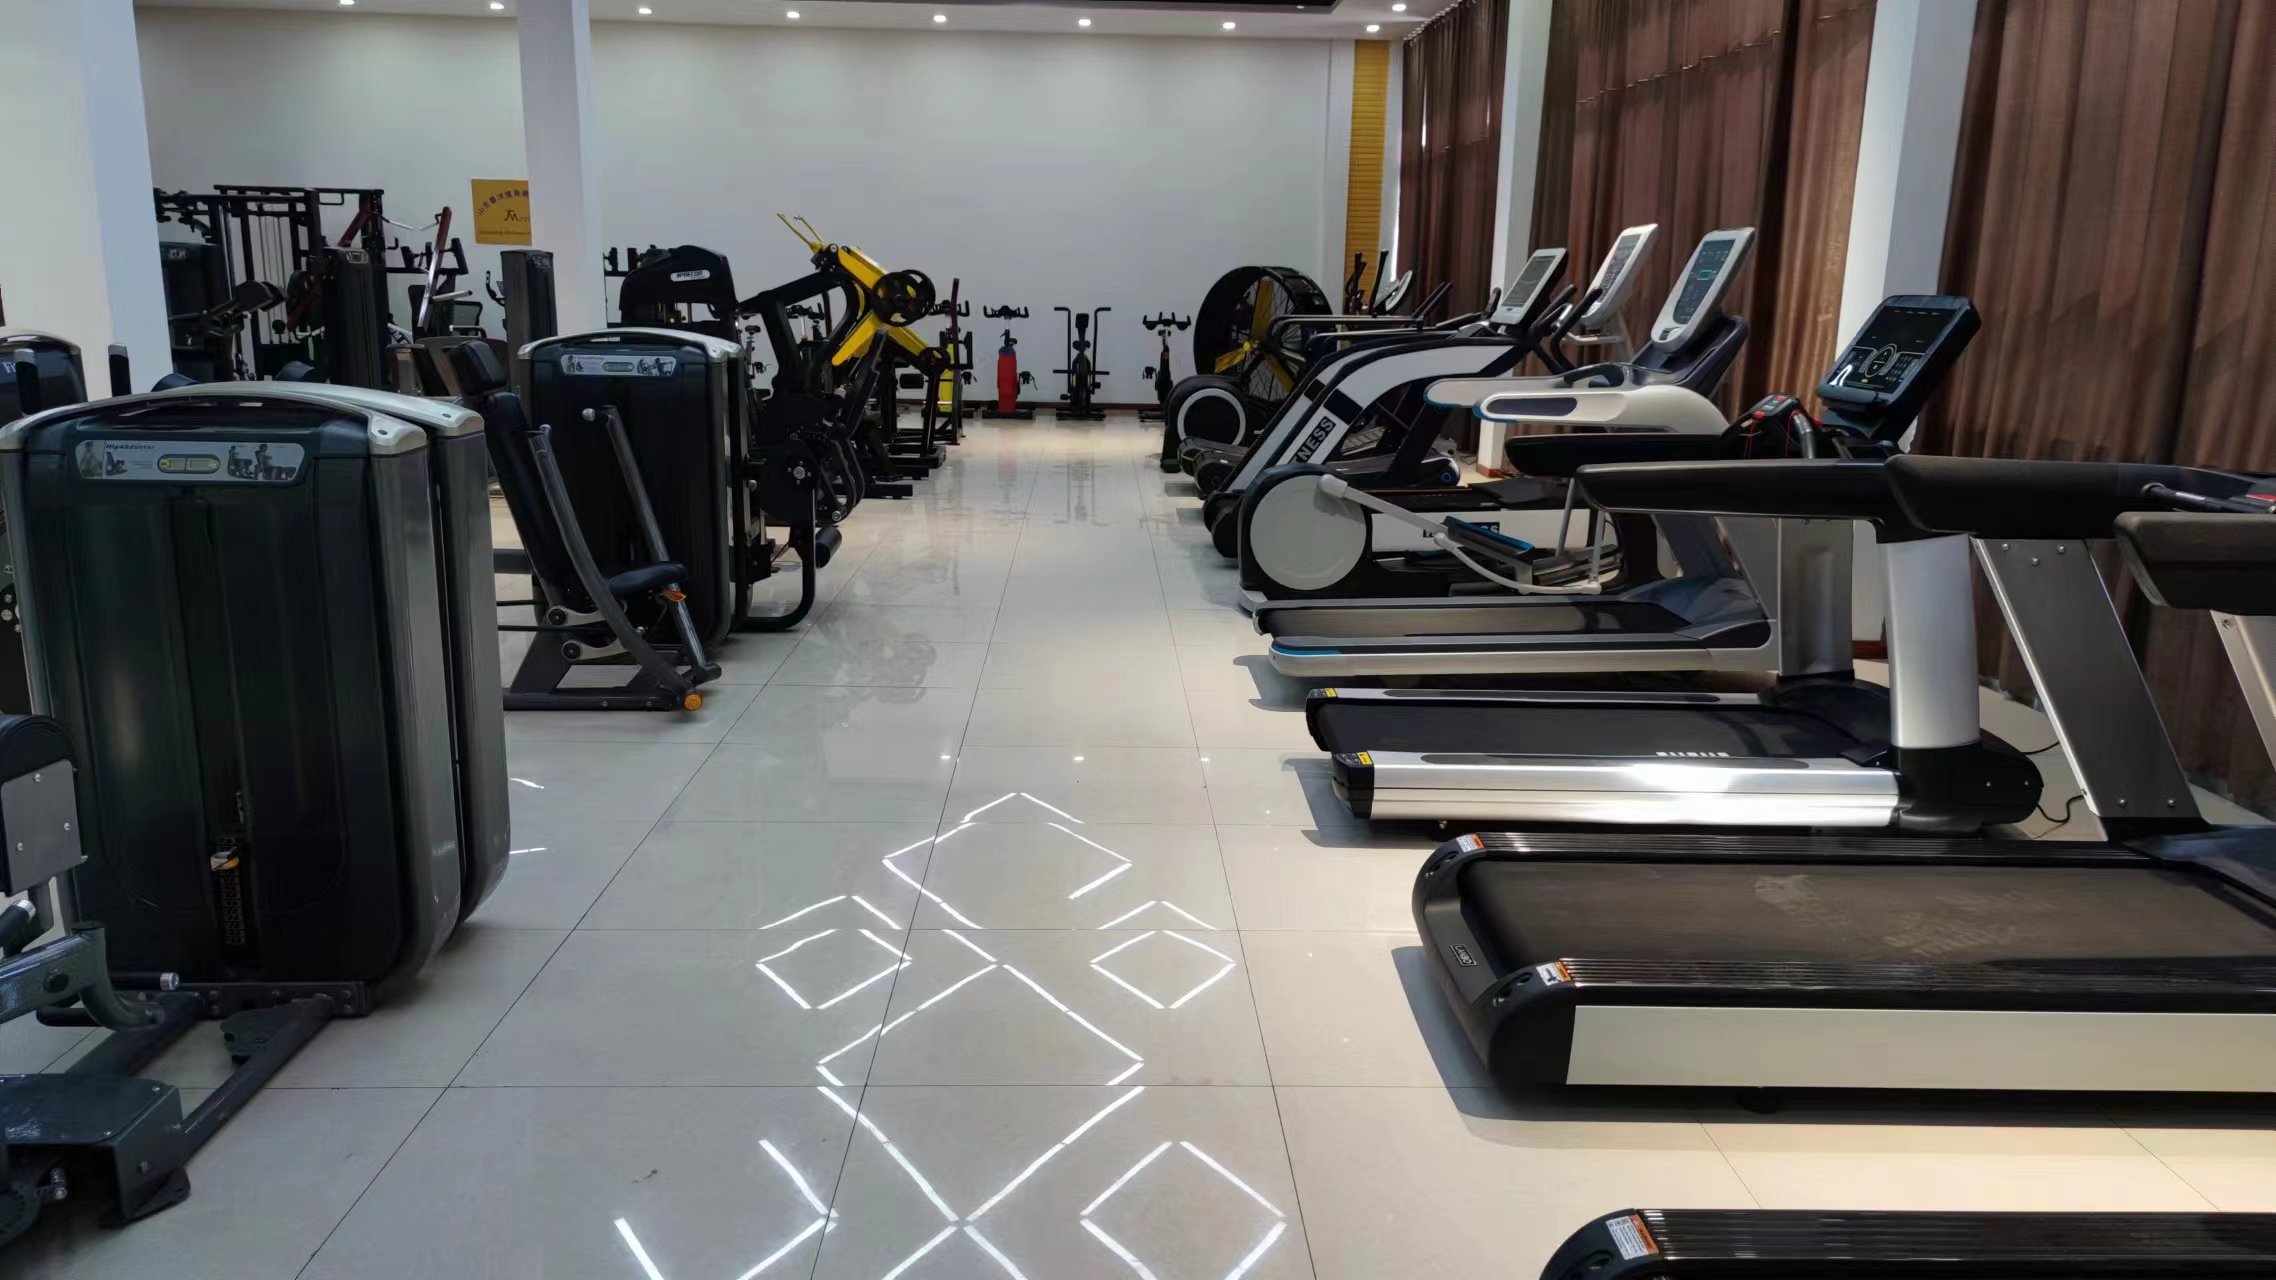 Classification and functions of fitness equipment